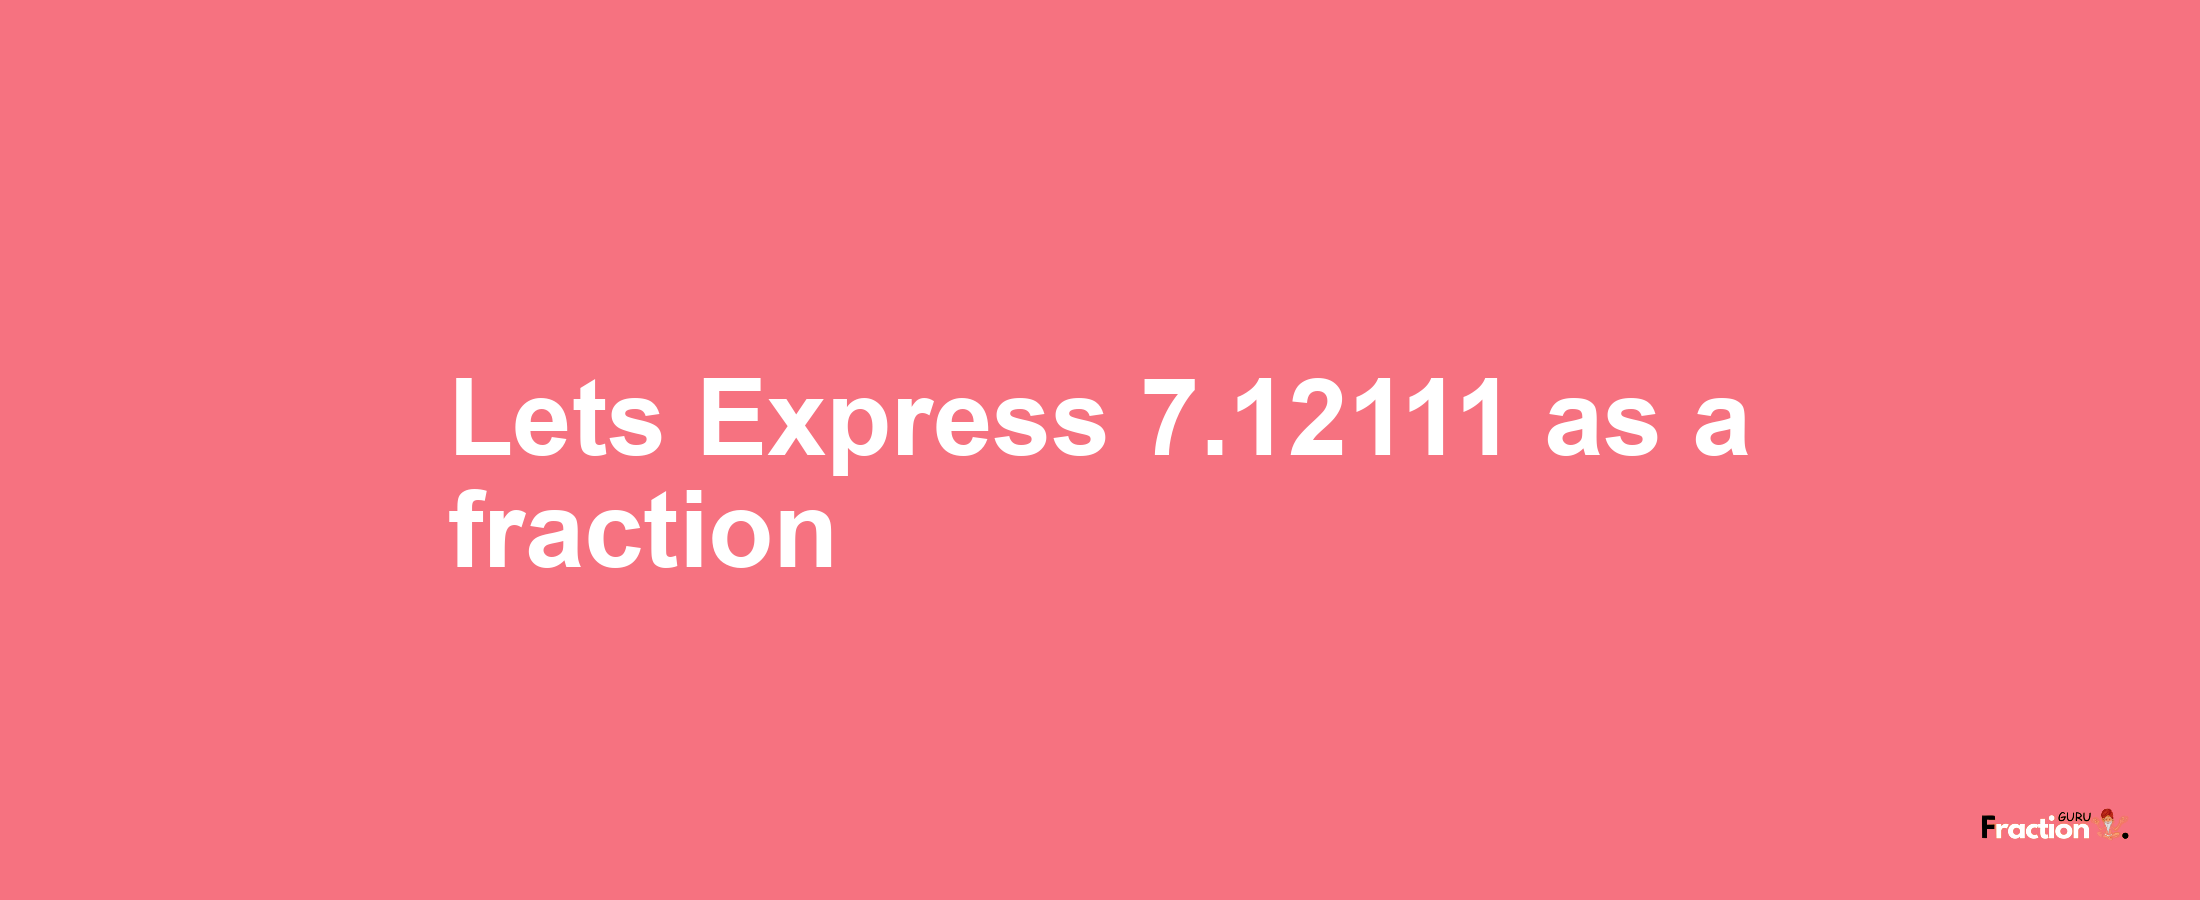 Lets Express 7.12111 as afraction